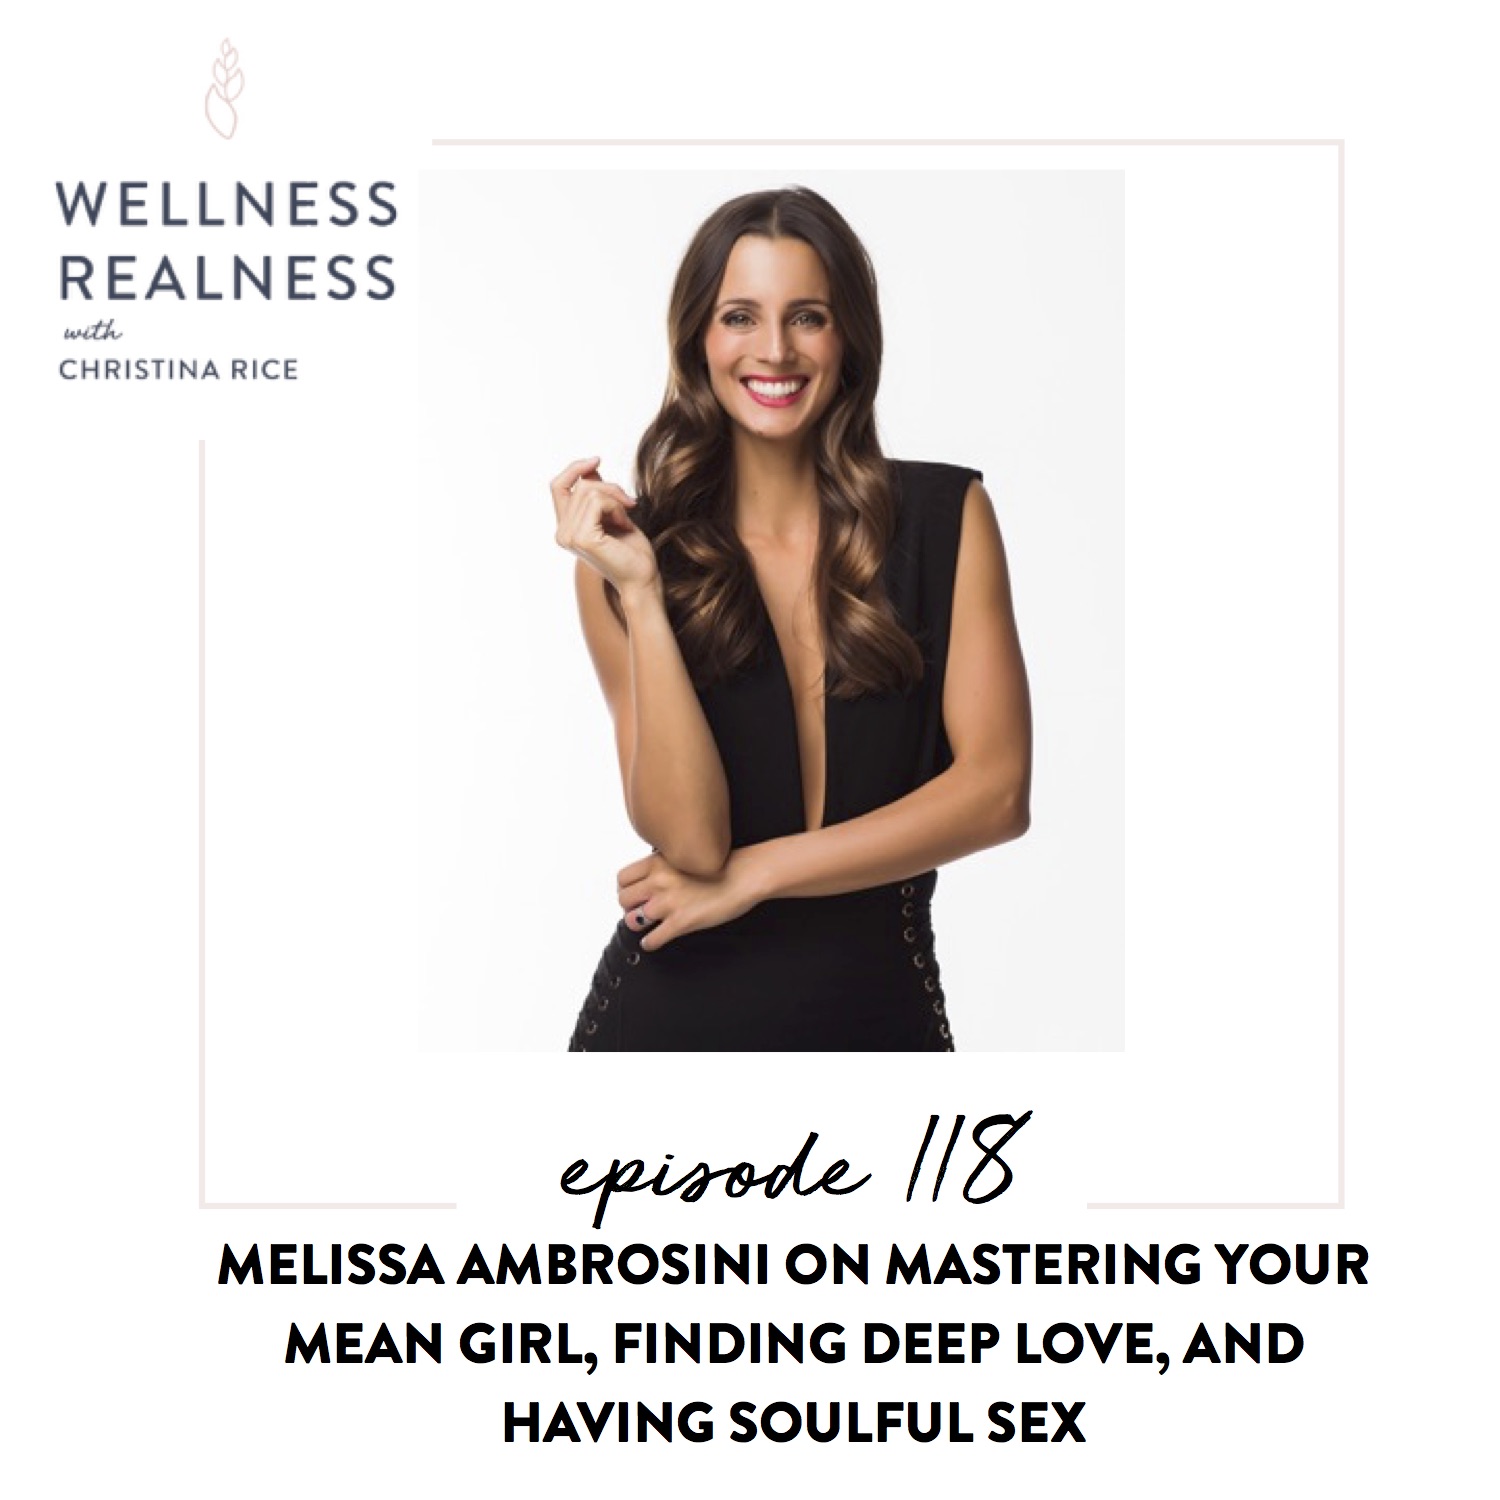 118: Melissa Ambrosini on Mastering Your Mean Girl, Finding Deep Love, and Having Soulful Sex